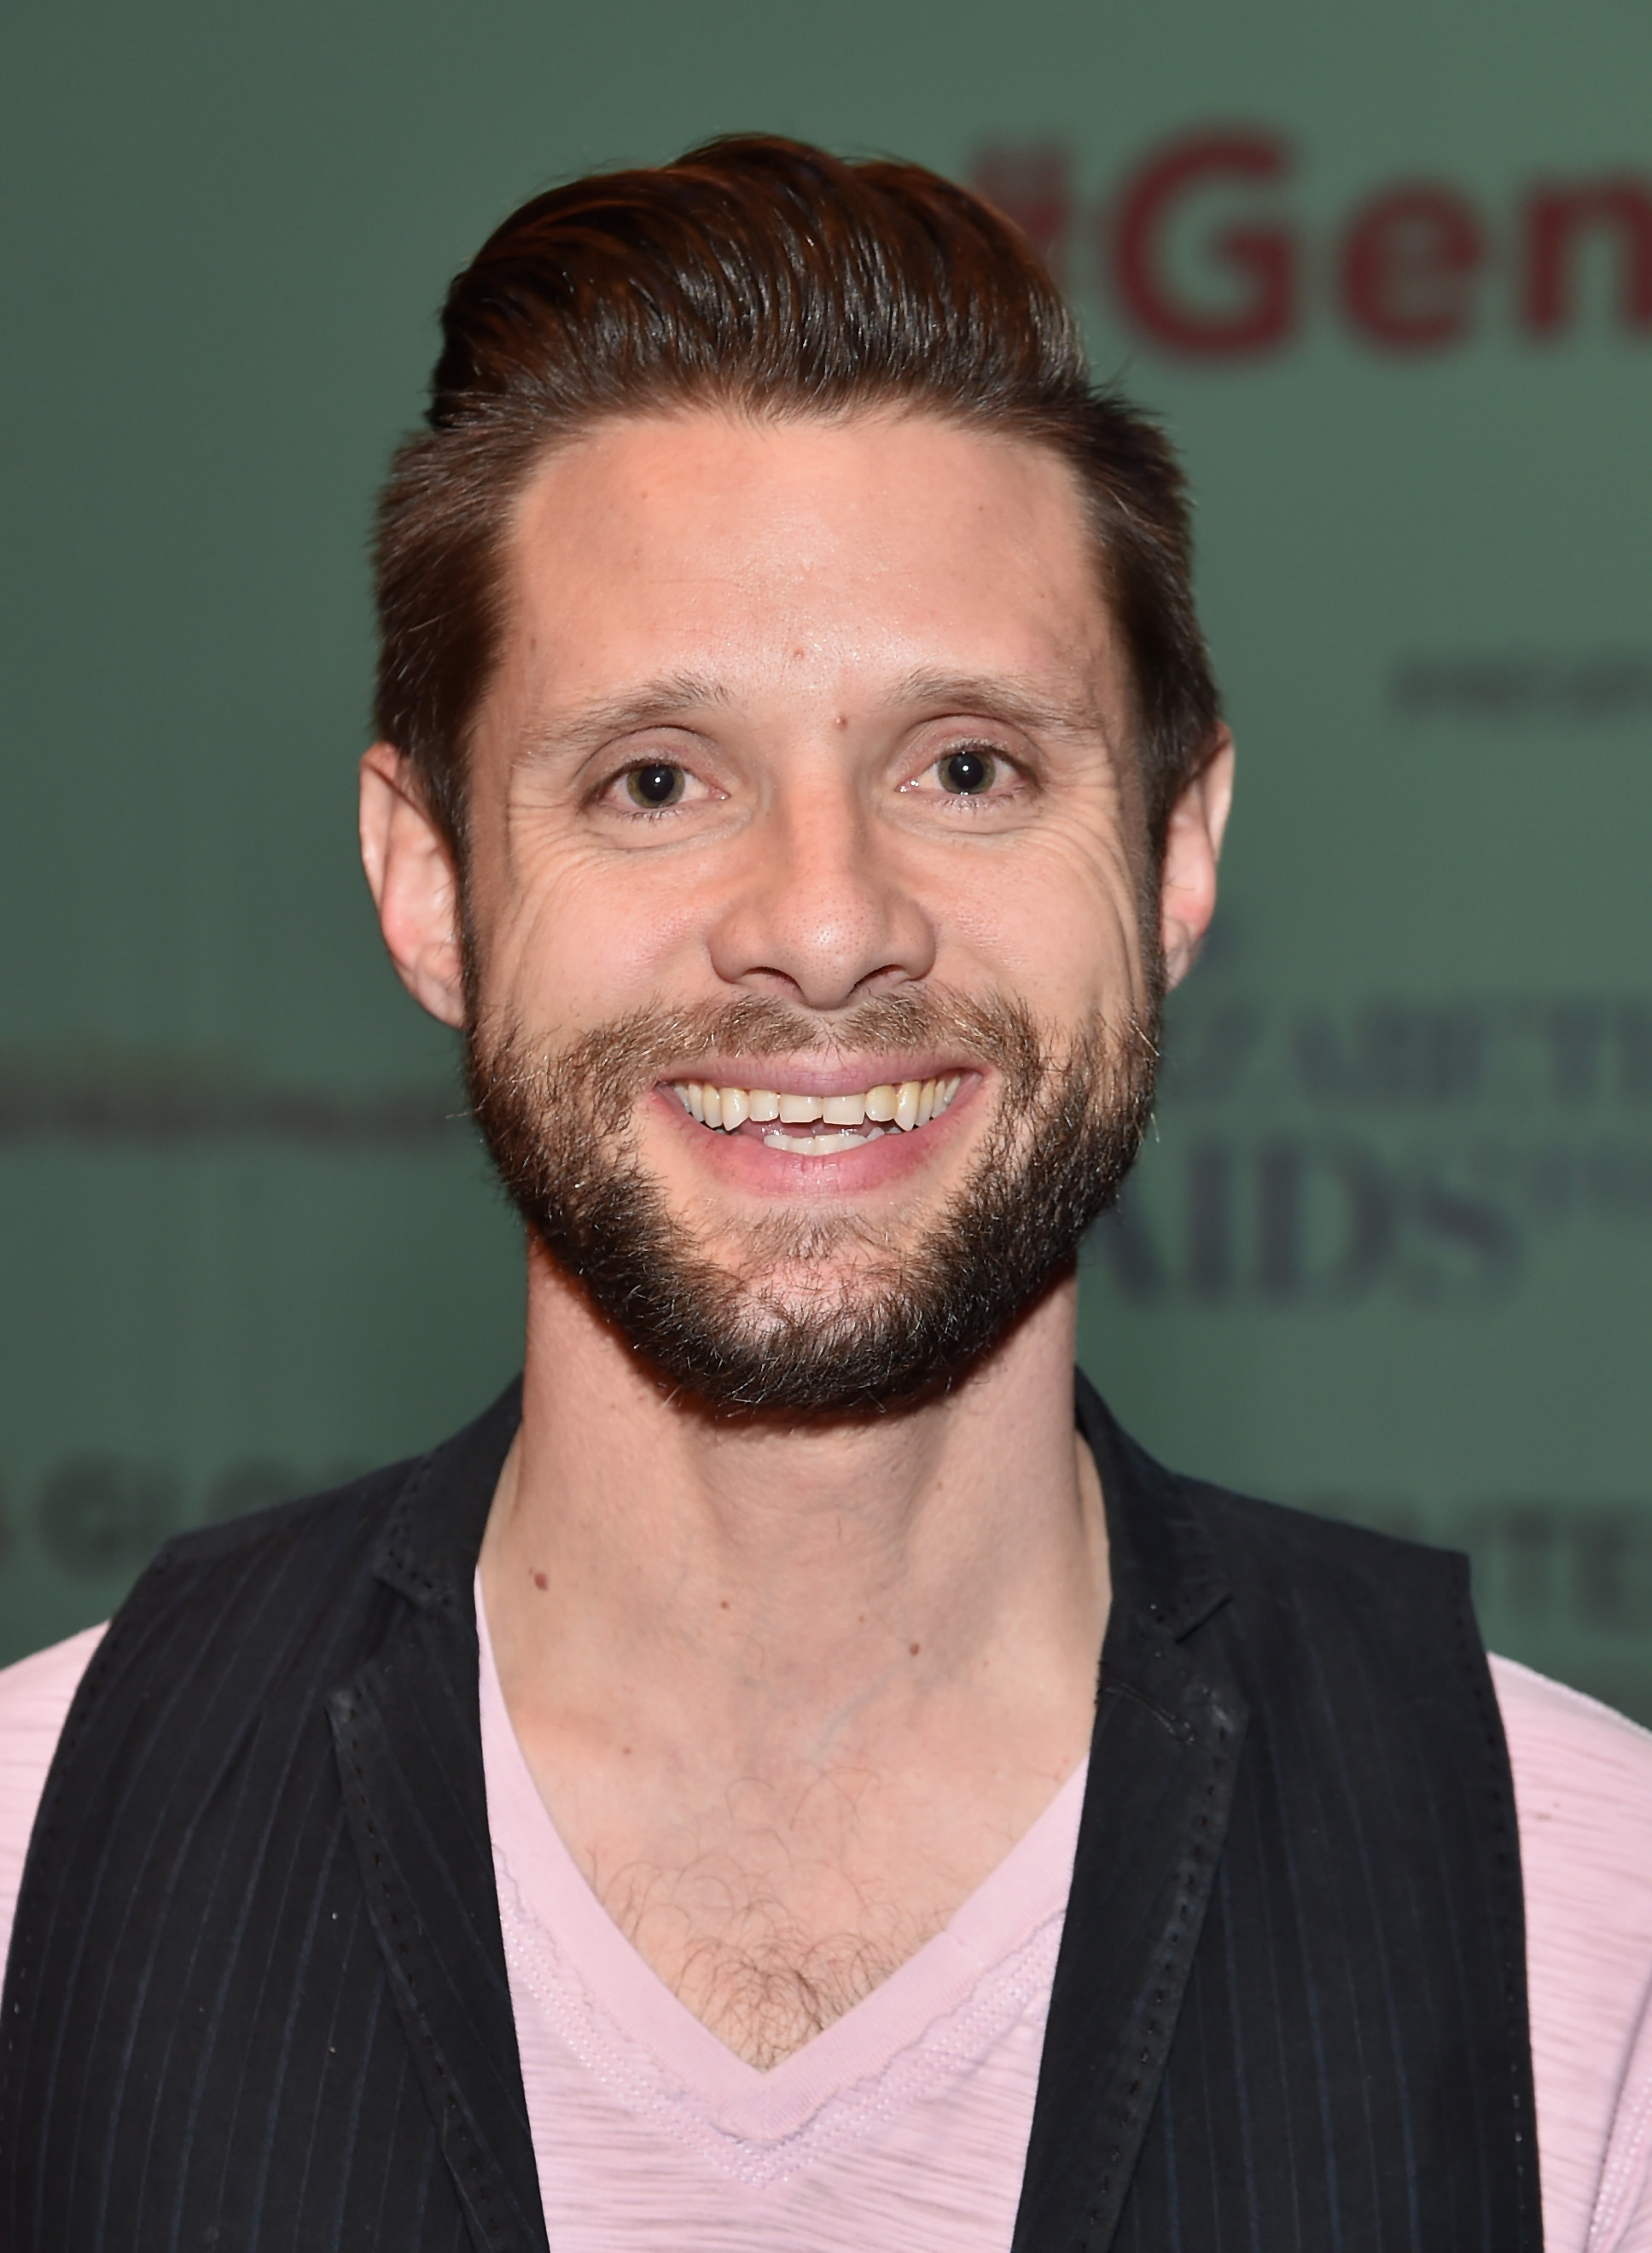 Danny Pintauro at the World AIDS day event in Los Angeles in 2015 | Source: Getty Images